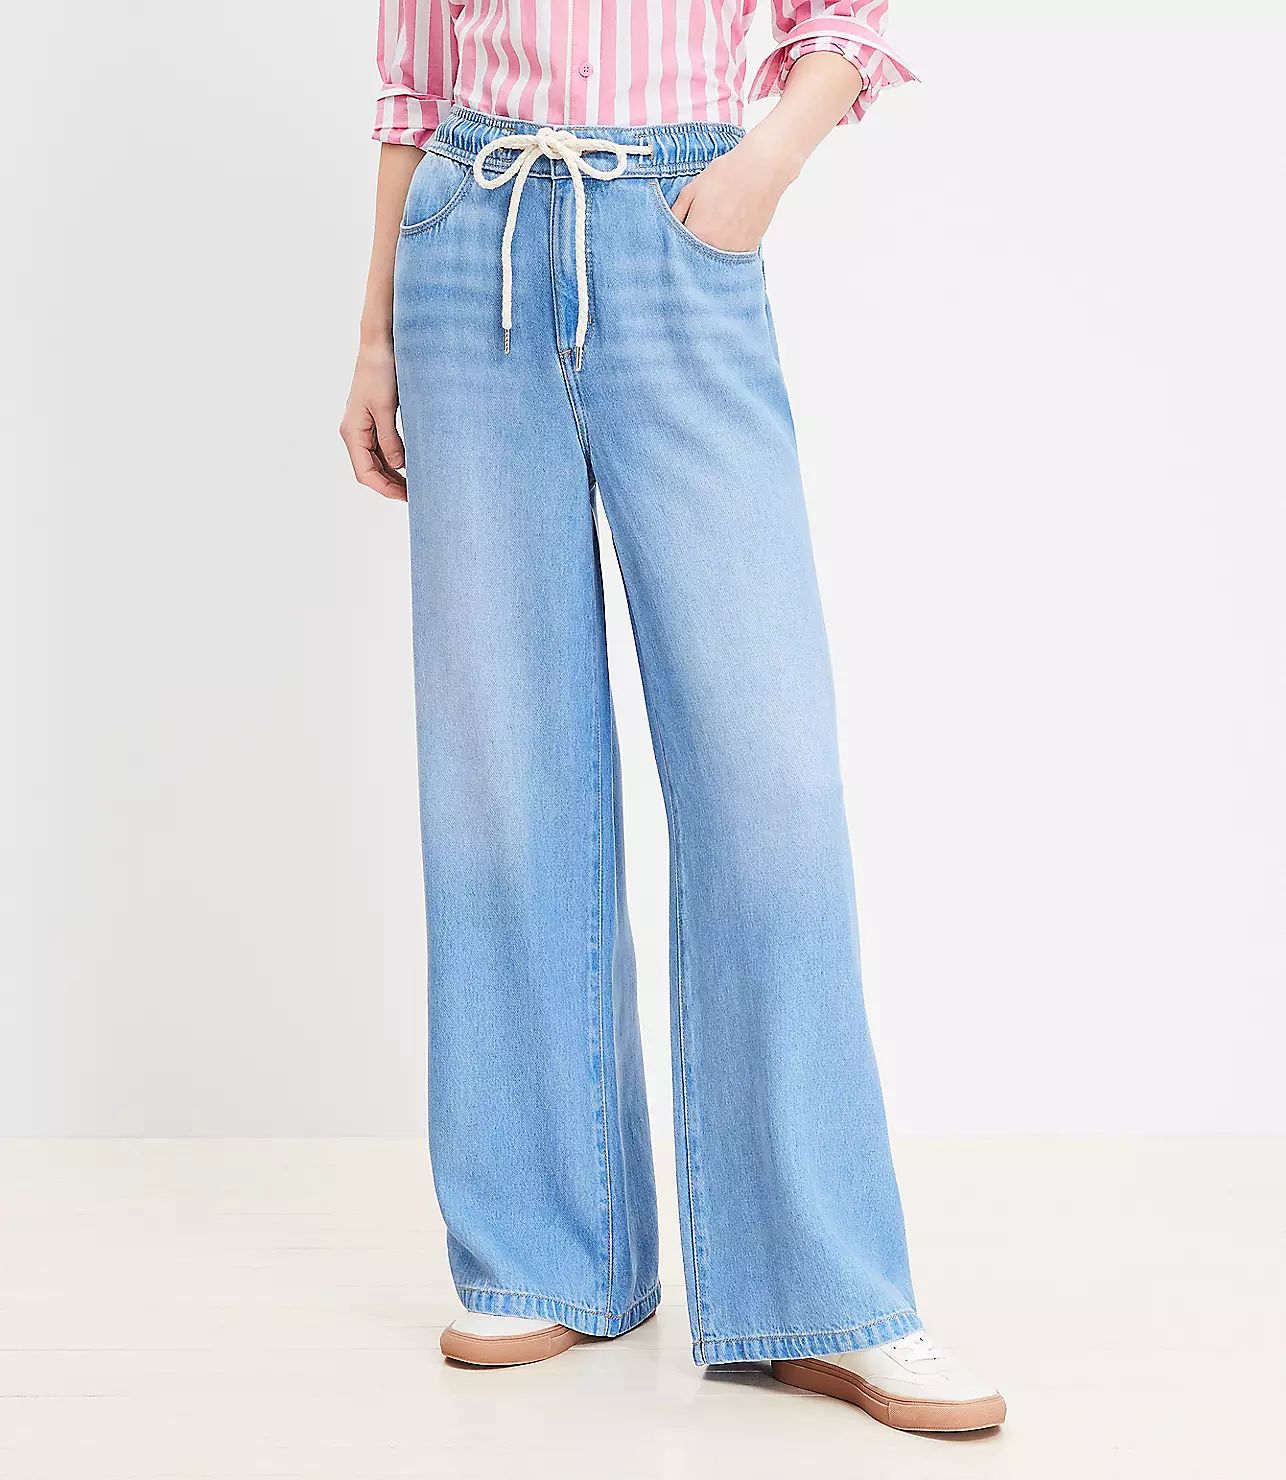 Pull On High Rise Palazzo Jeans in Light Wash | LOFT